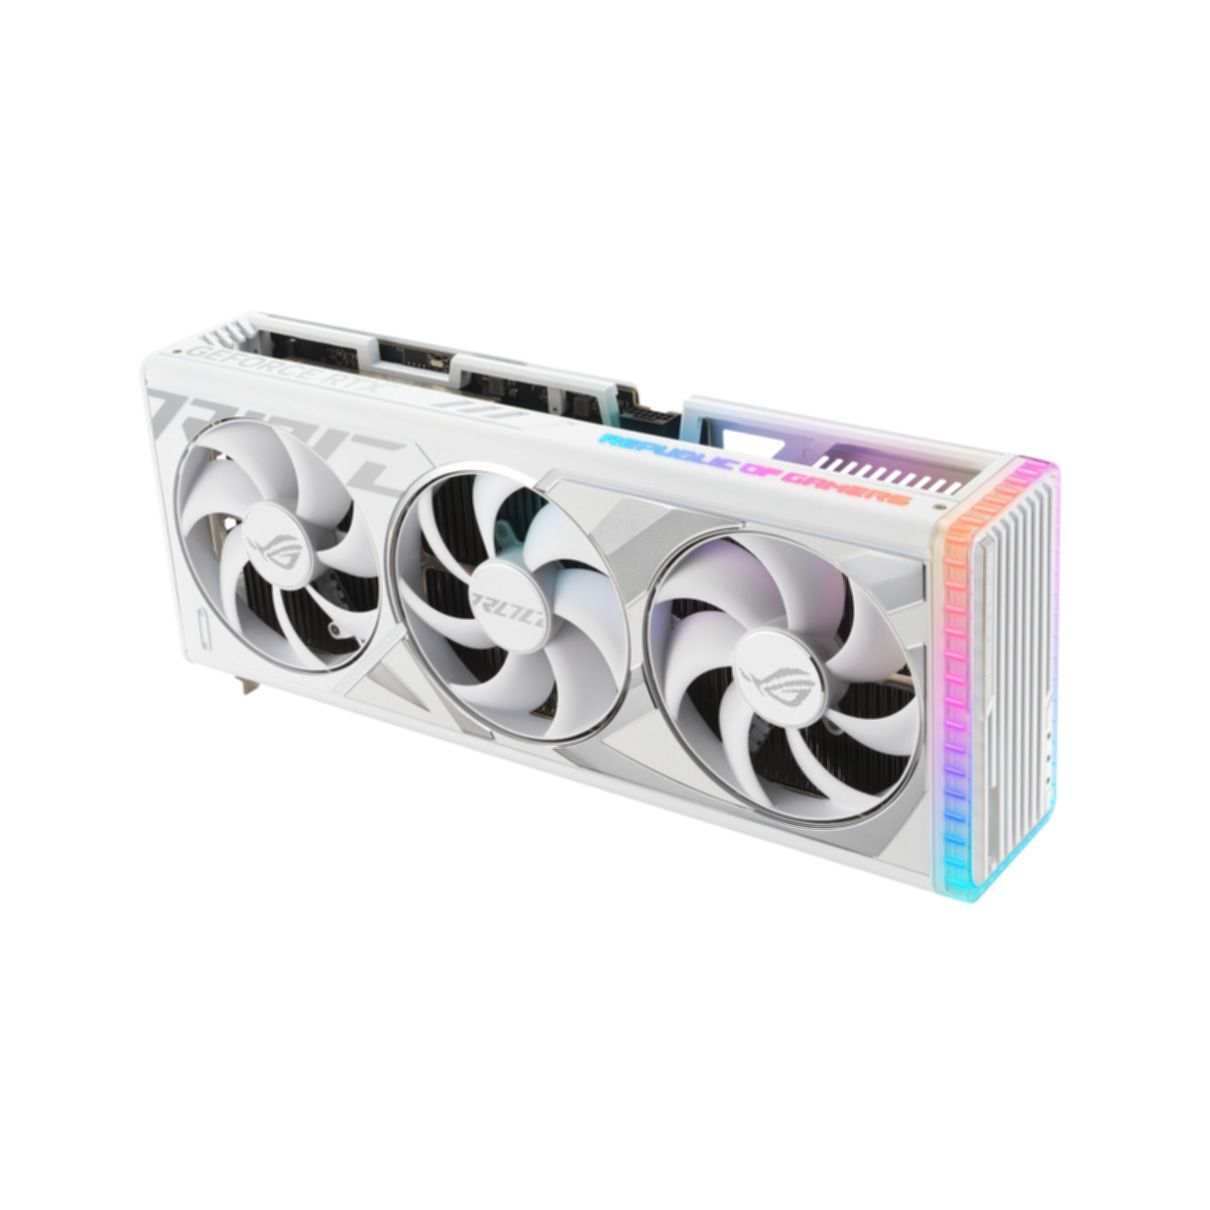 RTX GeForce card) (NVIDIA, ASUS Graphics White 4090